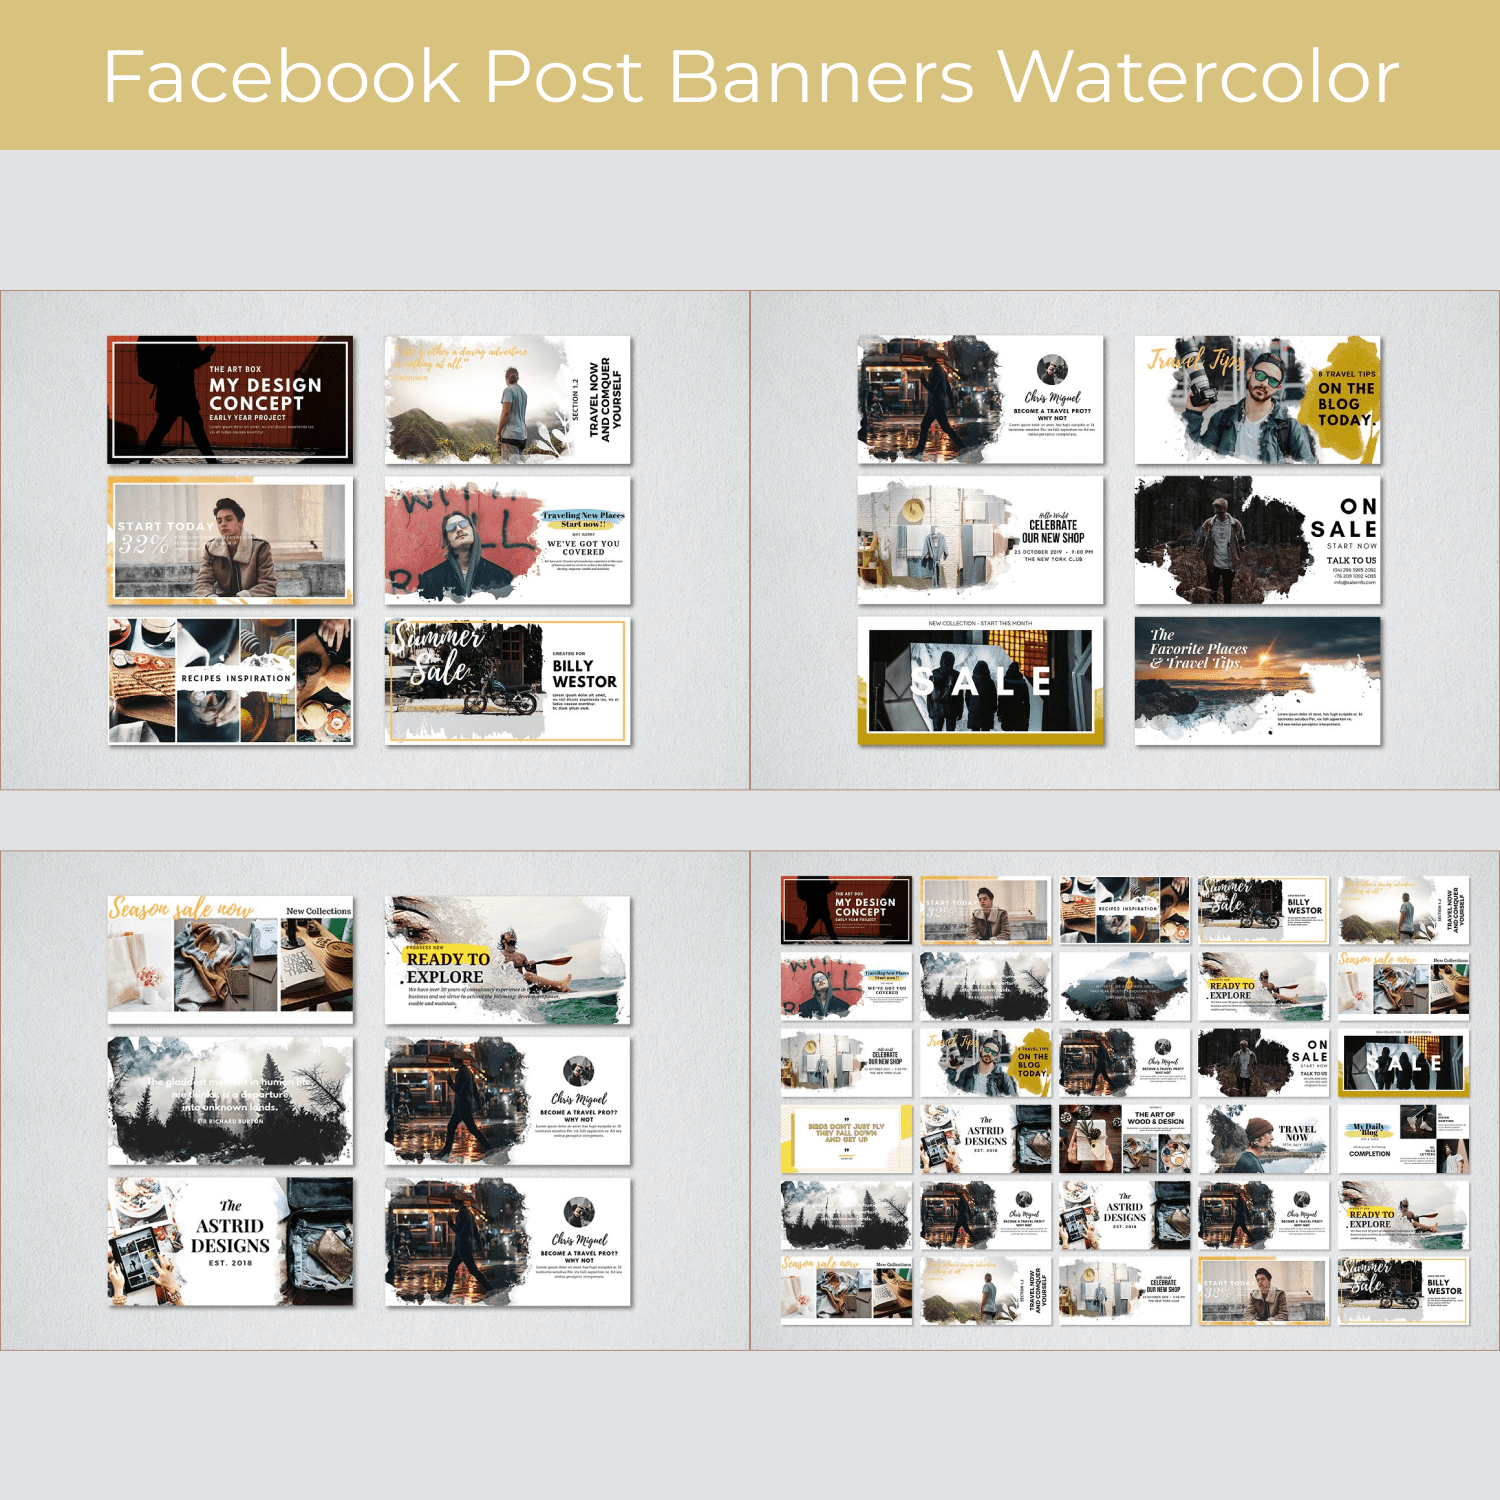 Facebook Post Banners Watercolor cover image.